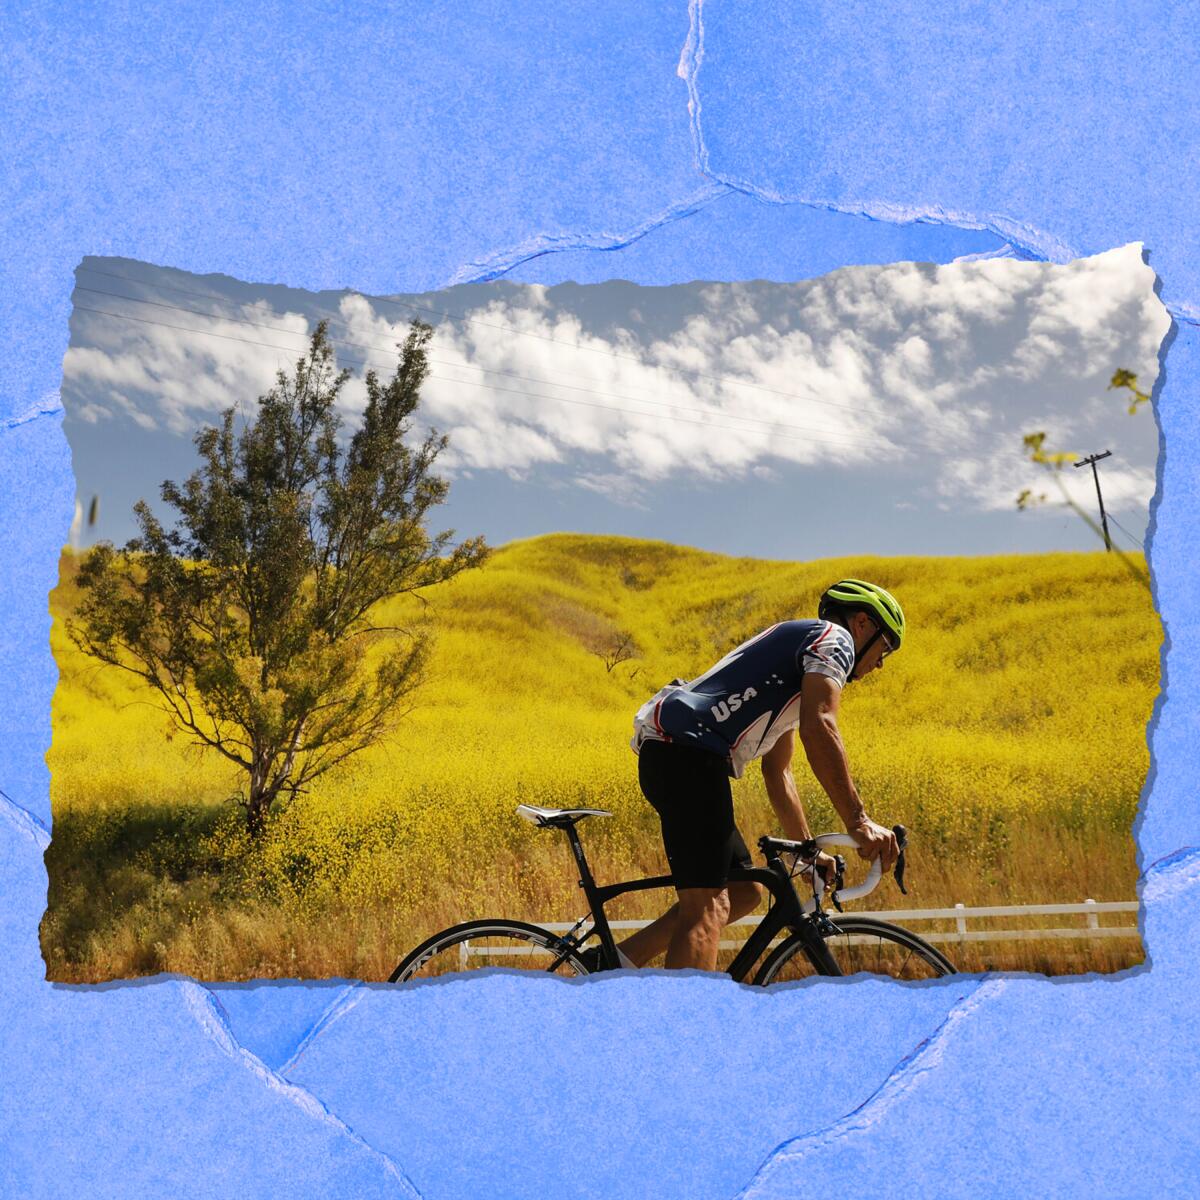 A man rides a bike in front of a mountain covered in mustard flowers.